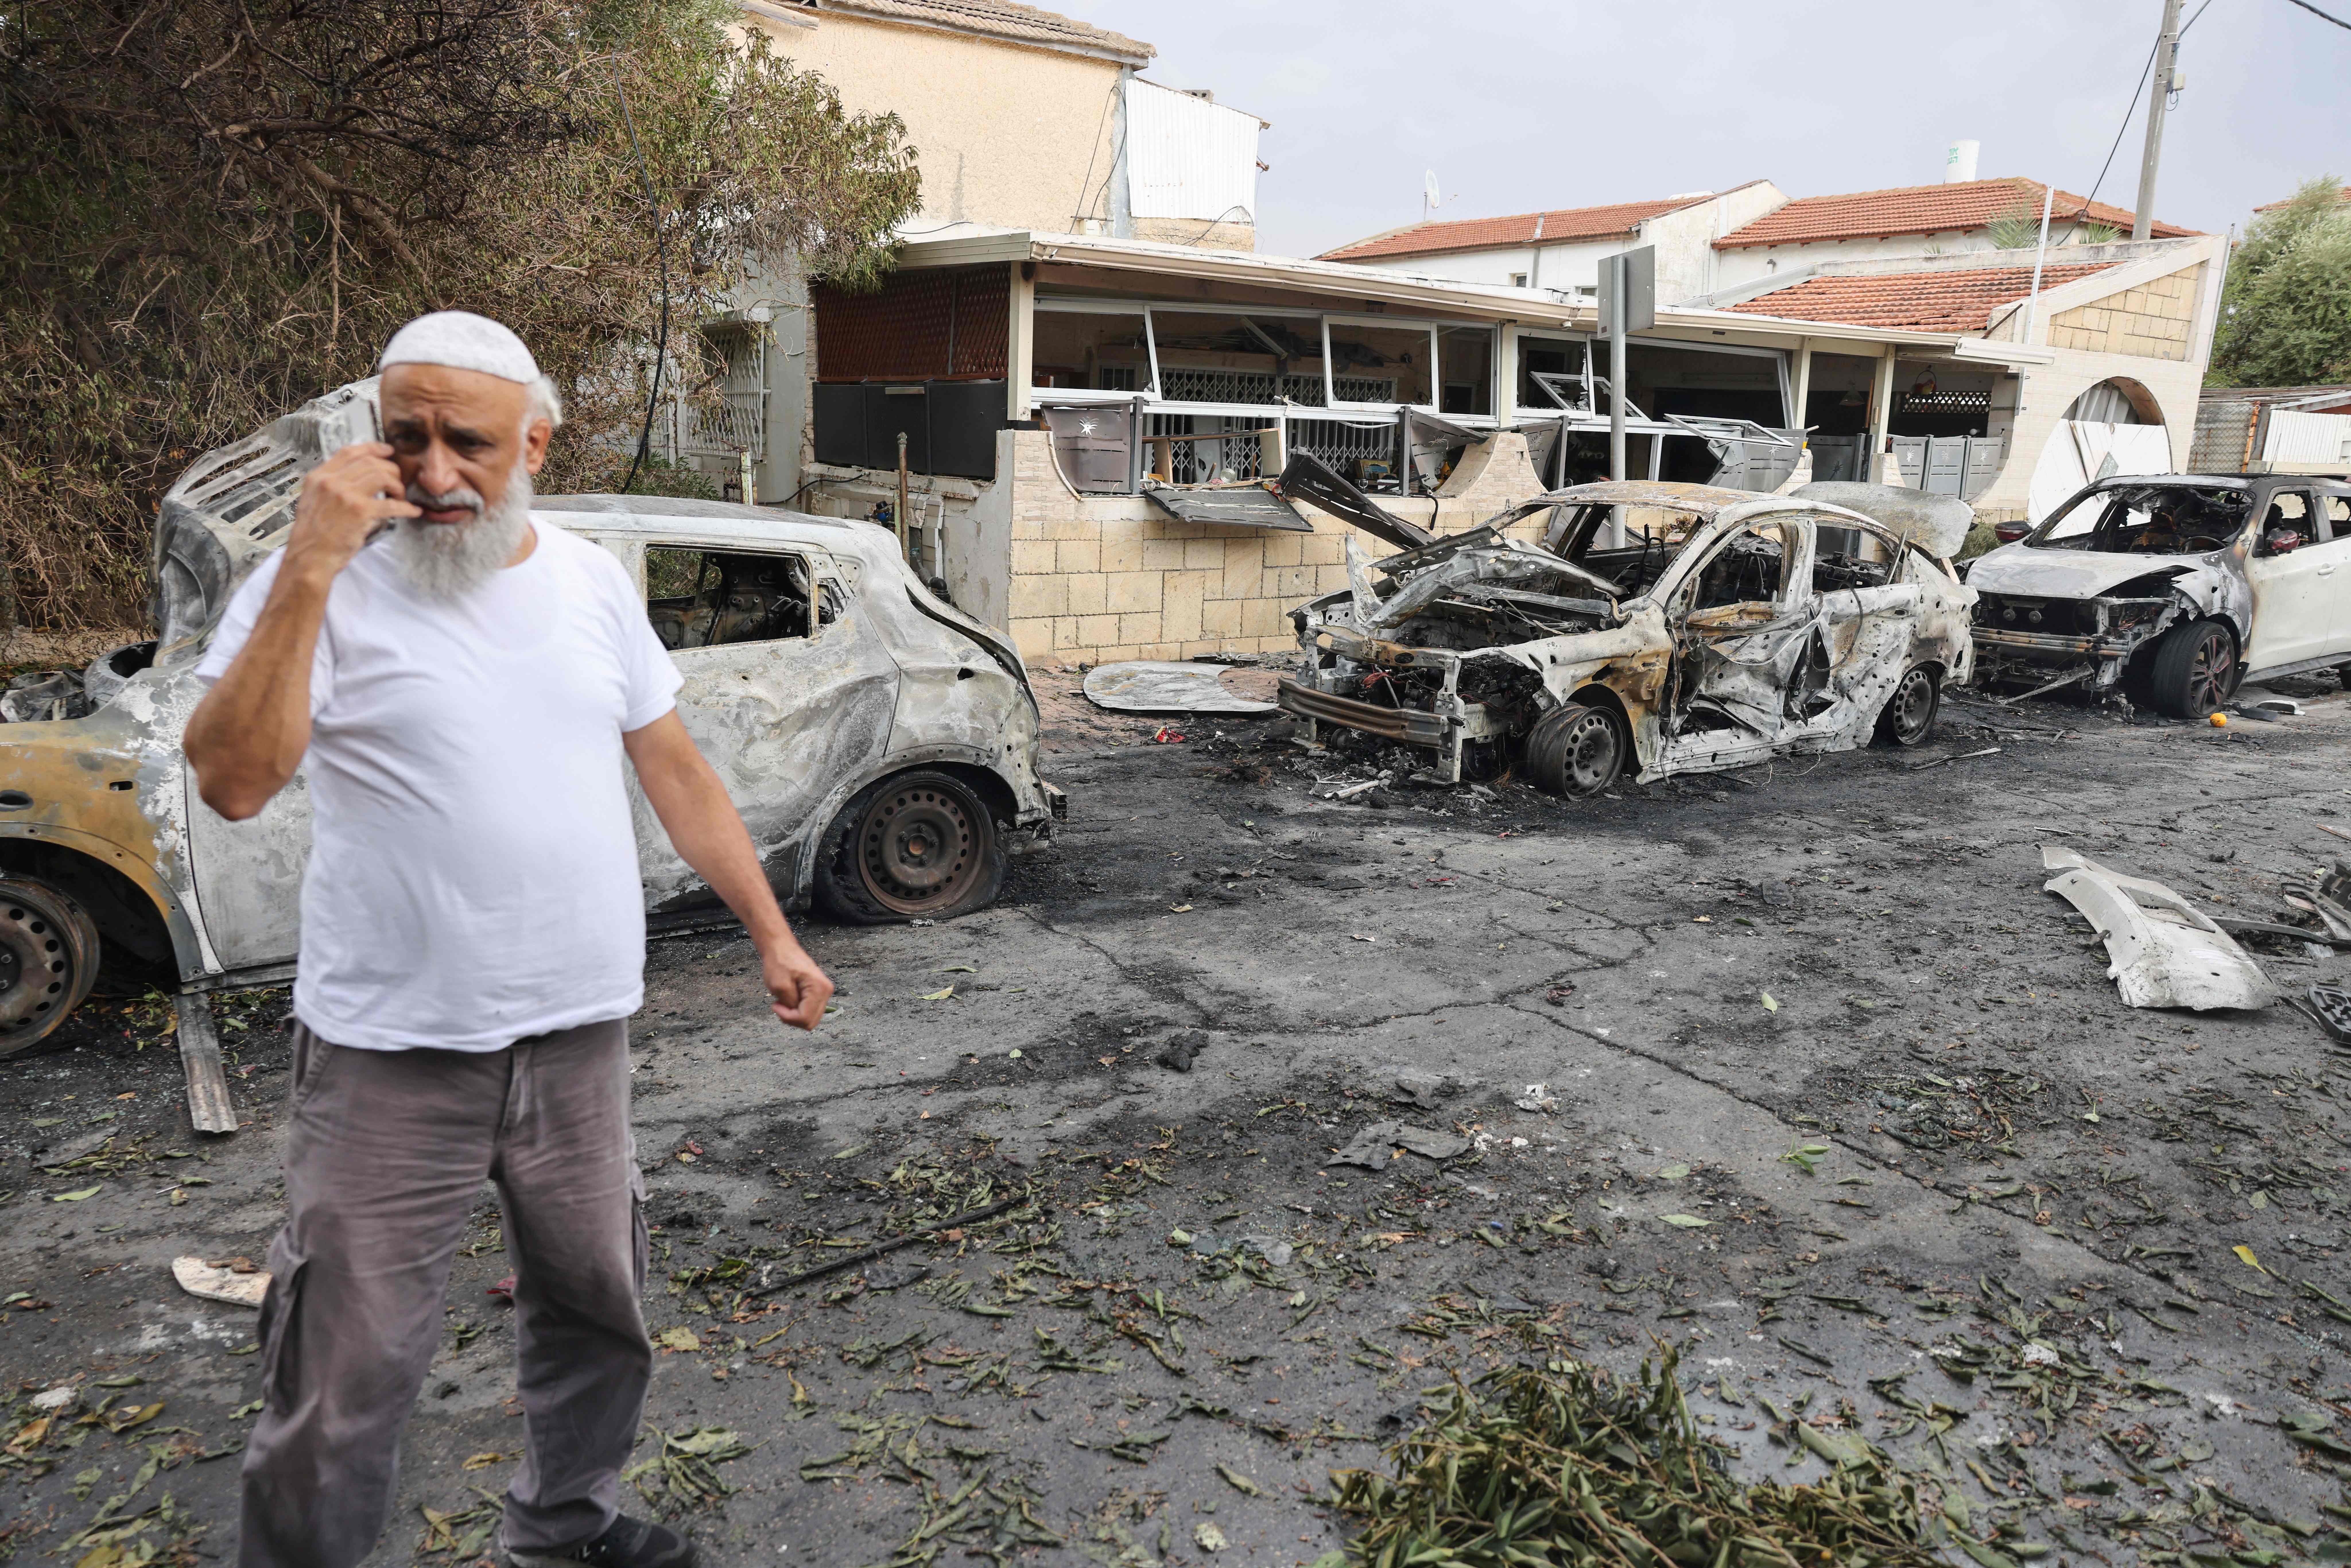 A man inspects the damage in the southern Israeli city of Ashkelon after a rocket attack from Gaza on Oct. 9. Photo: Menahem Kahana/AFP via Getty Images